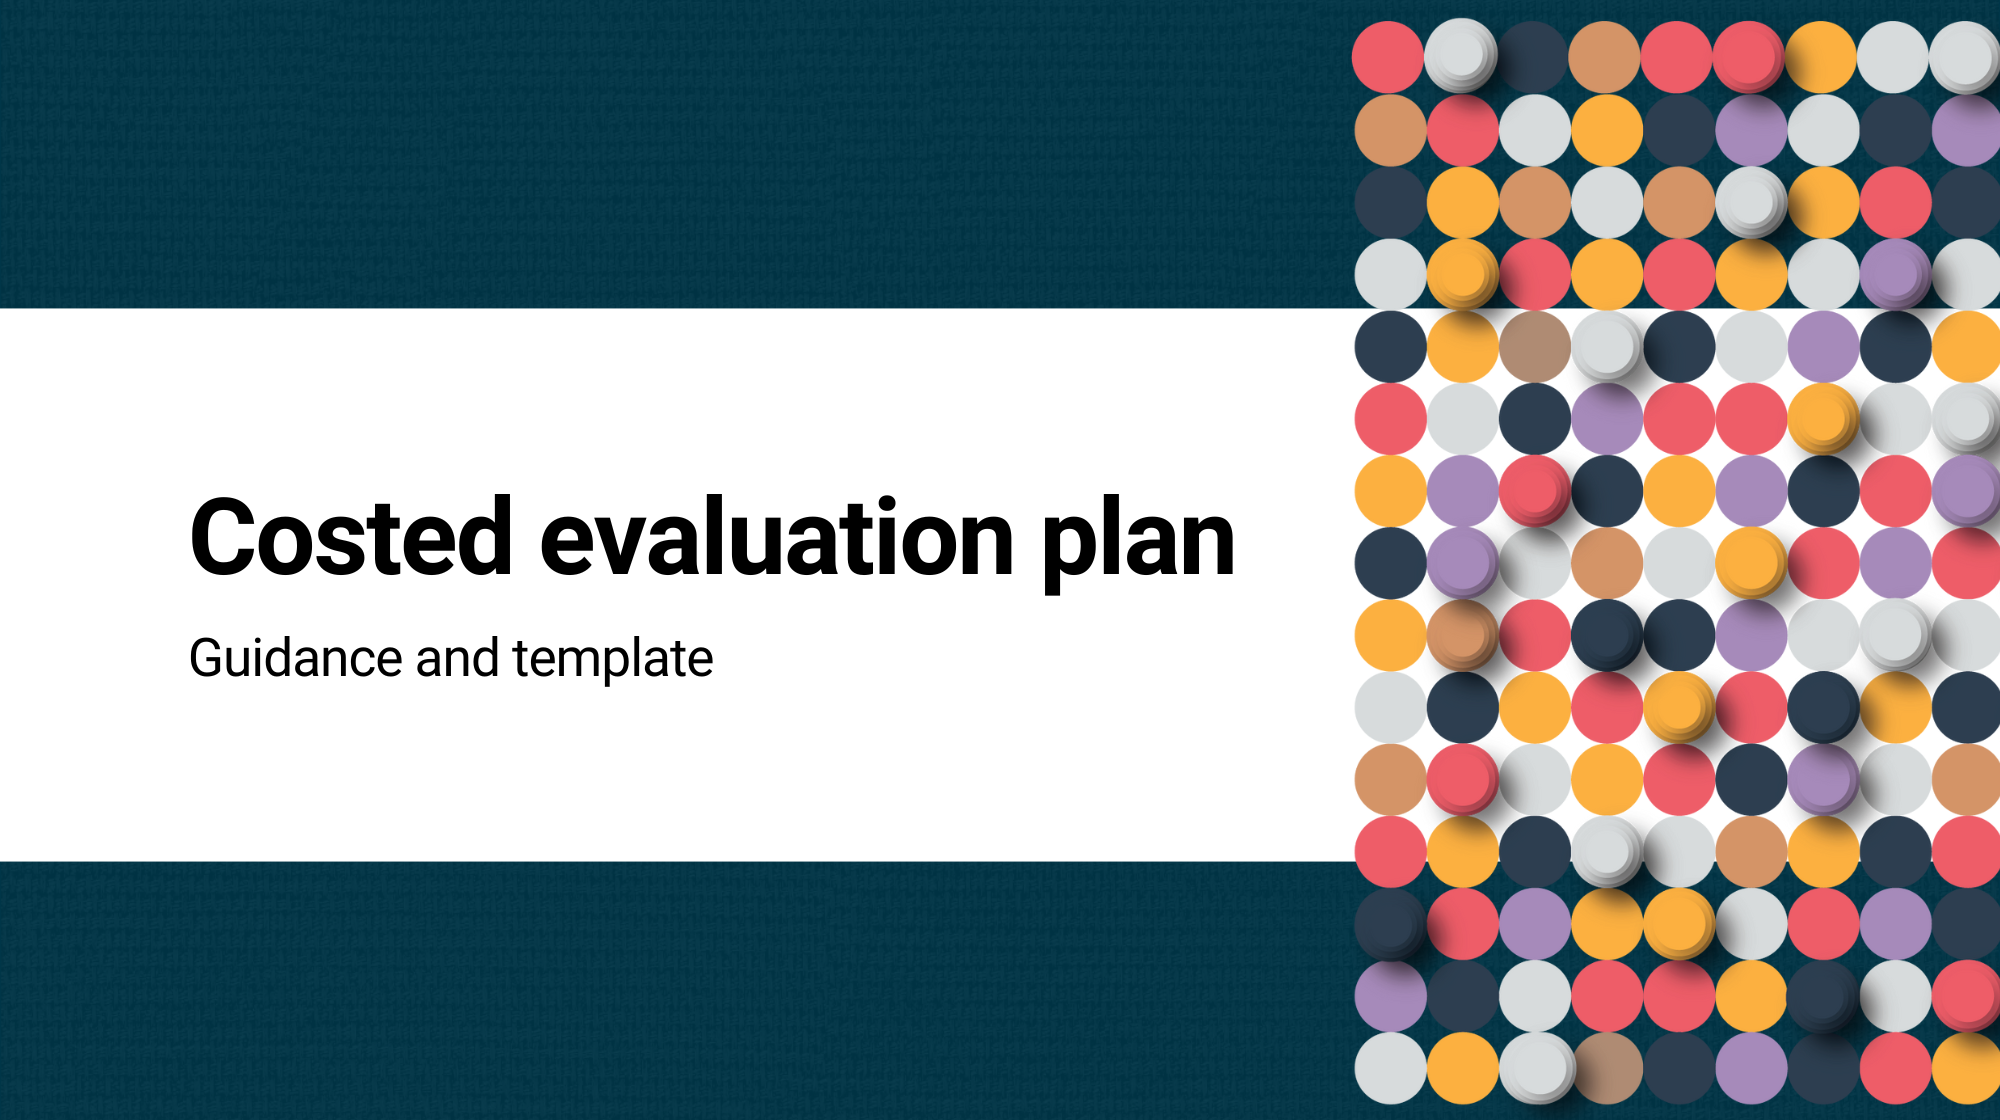 Costed evaluation plan: Guidance and template